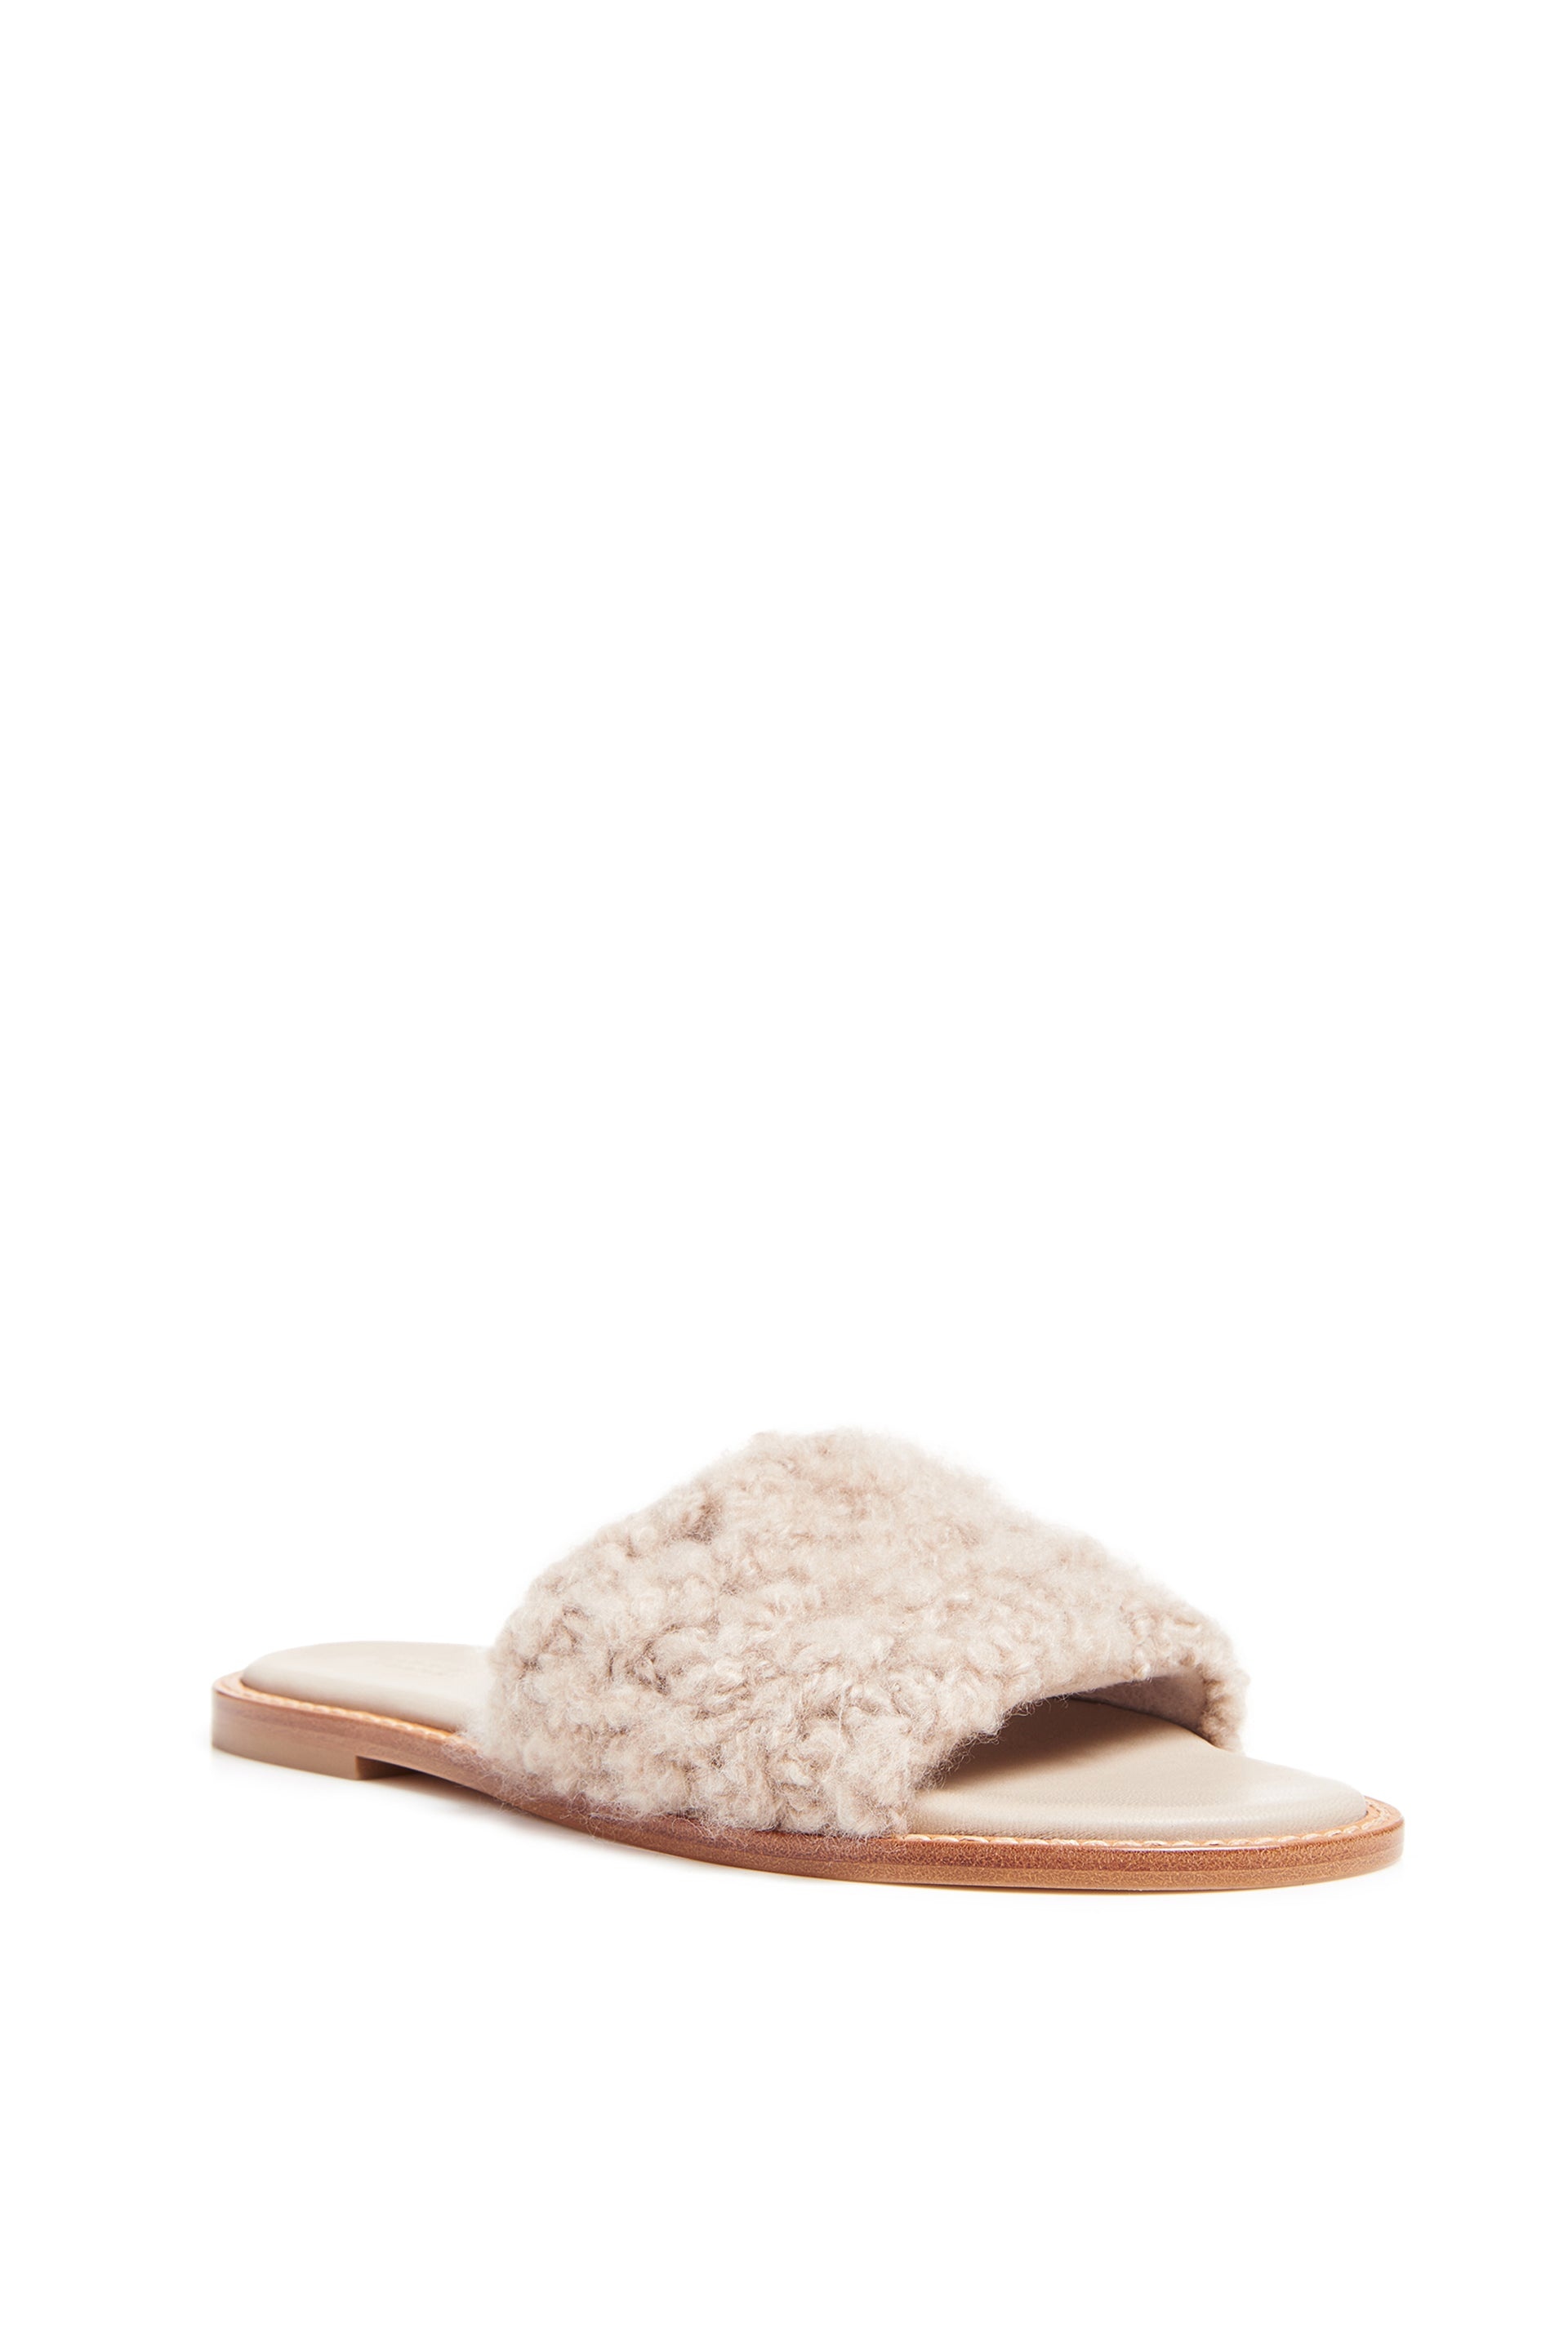 Ballast Slide in Oatmeal Leather & Cashmere - 2